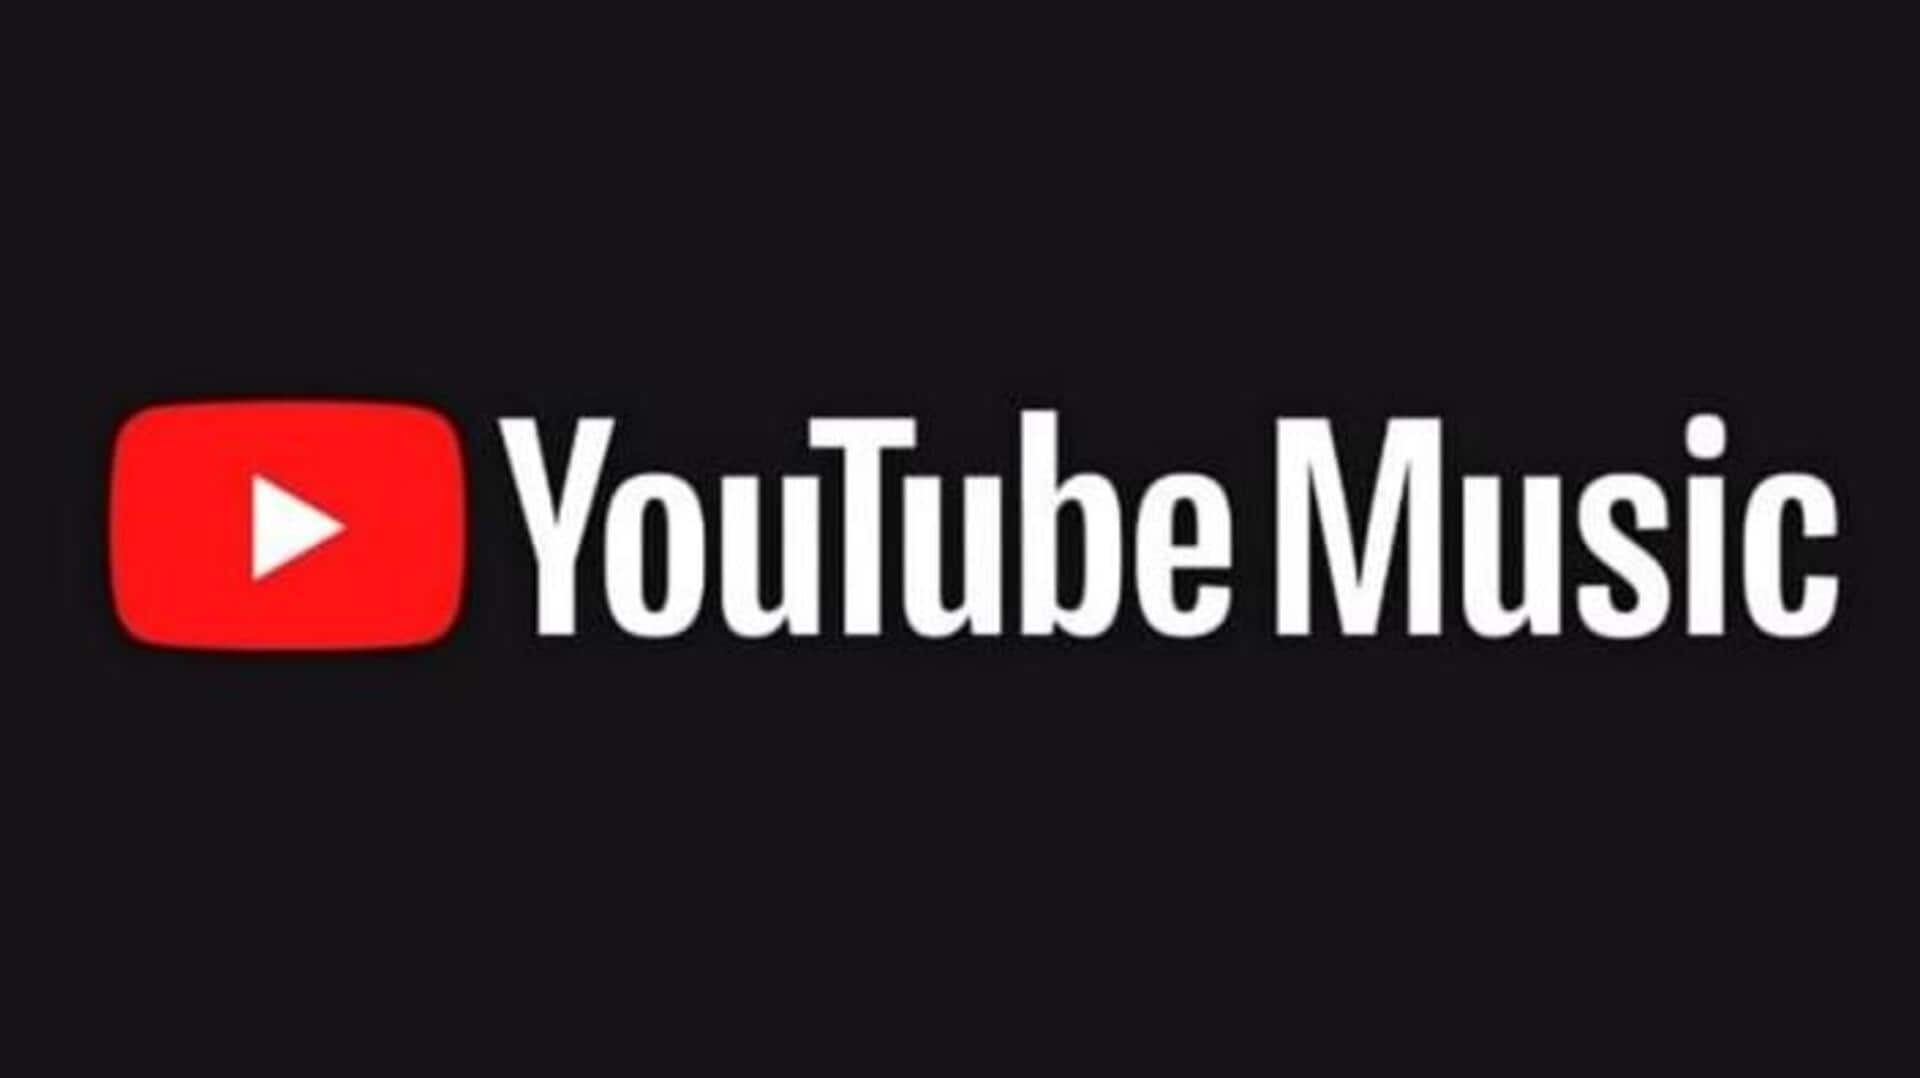 YouTube Music app makes song details more accessible 